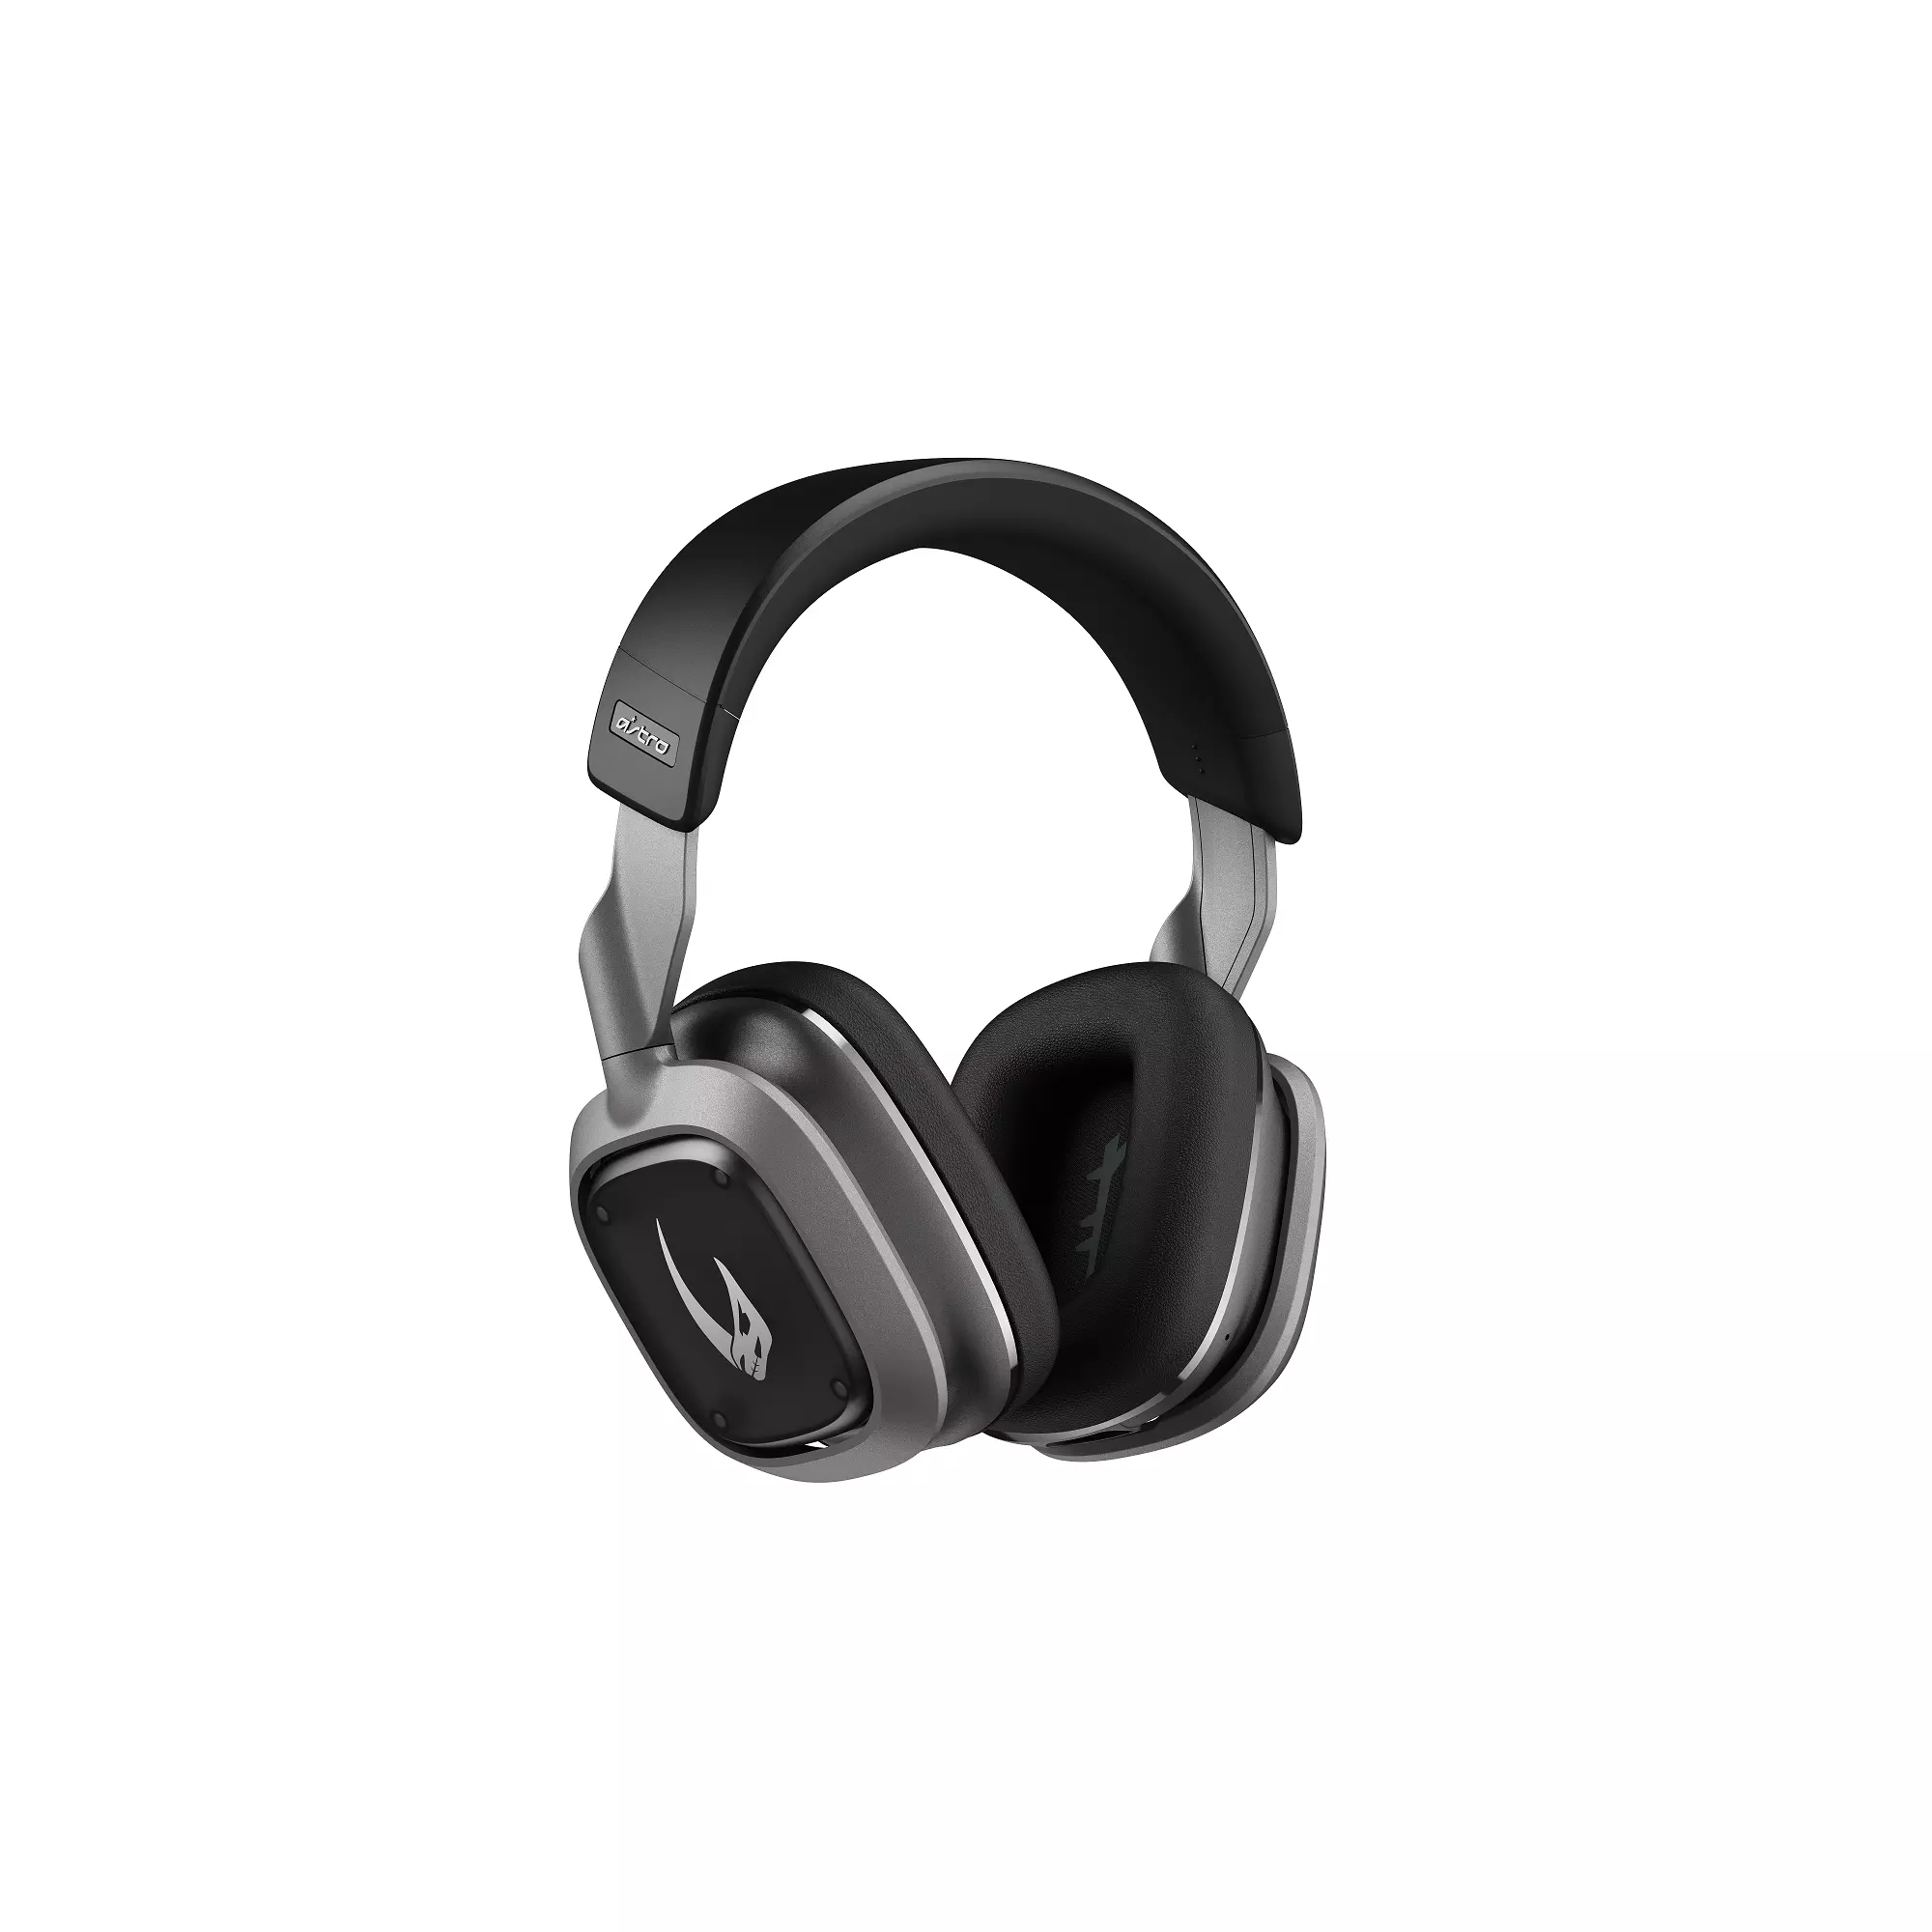 Astro A30 Wireless Gaming Headset The